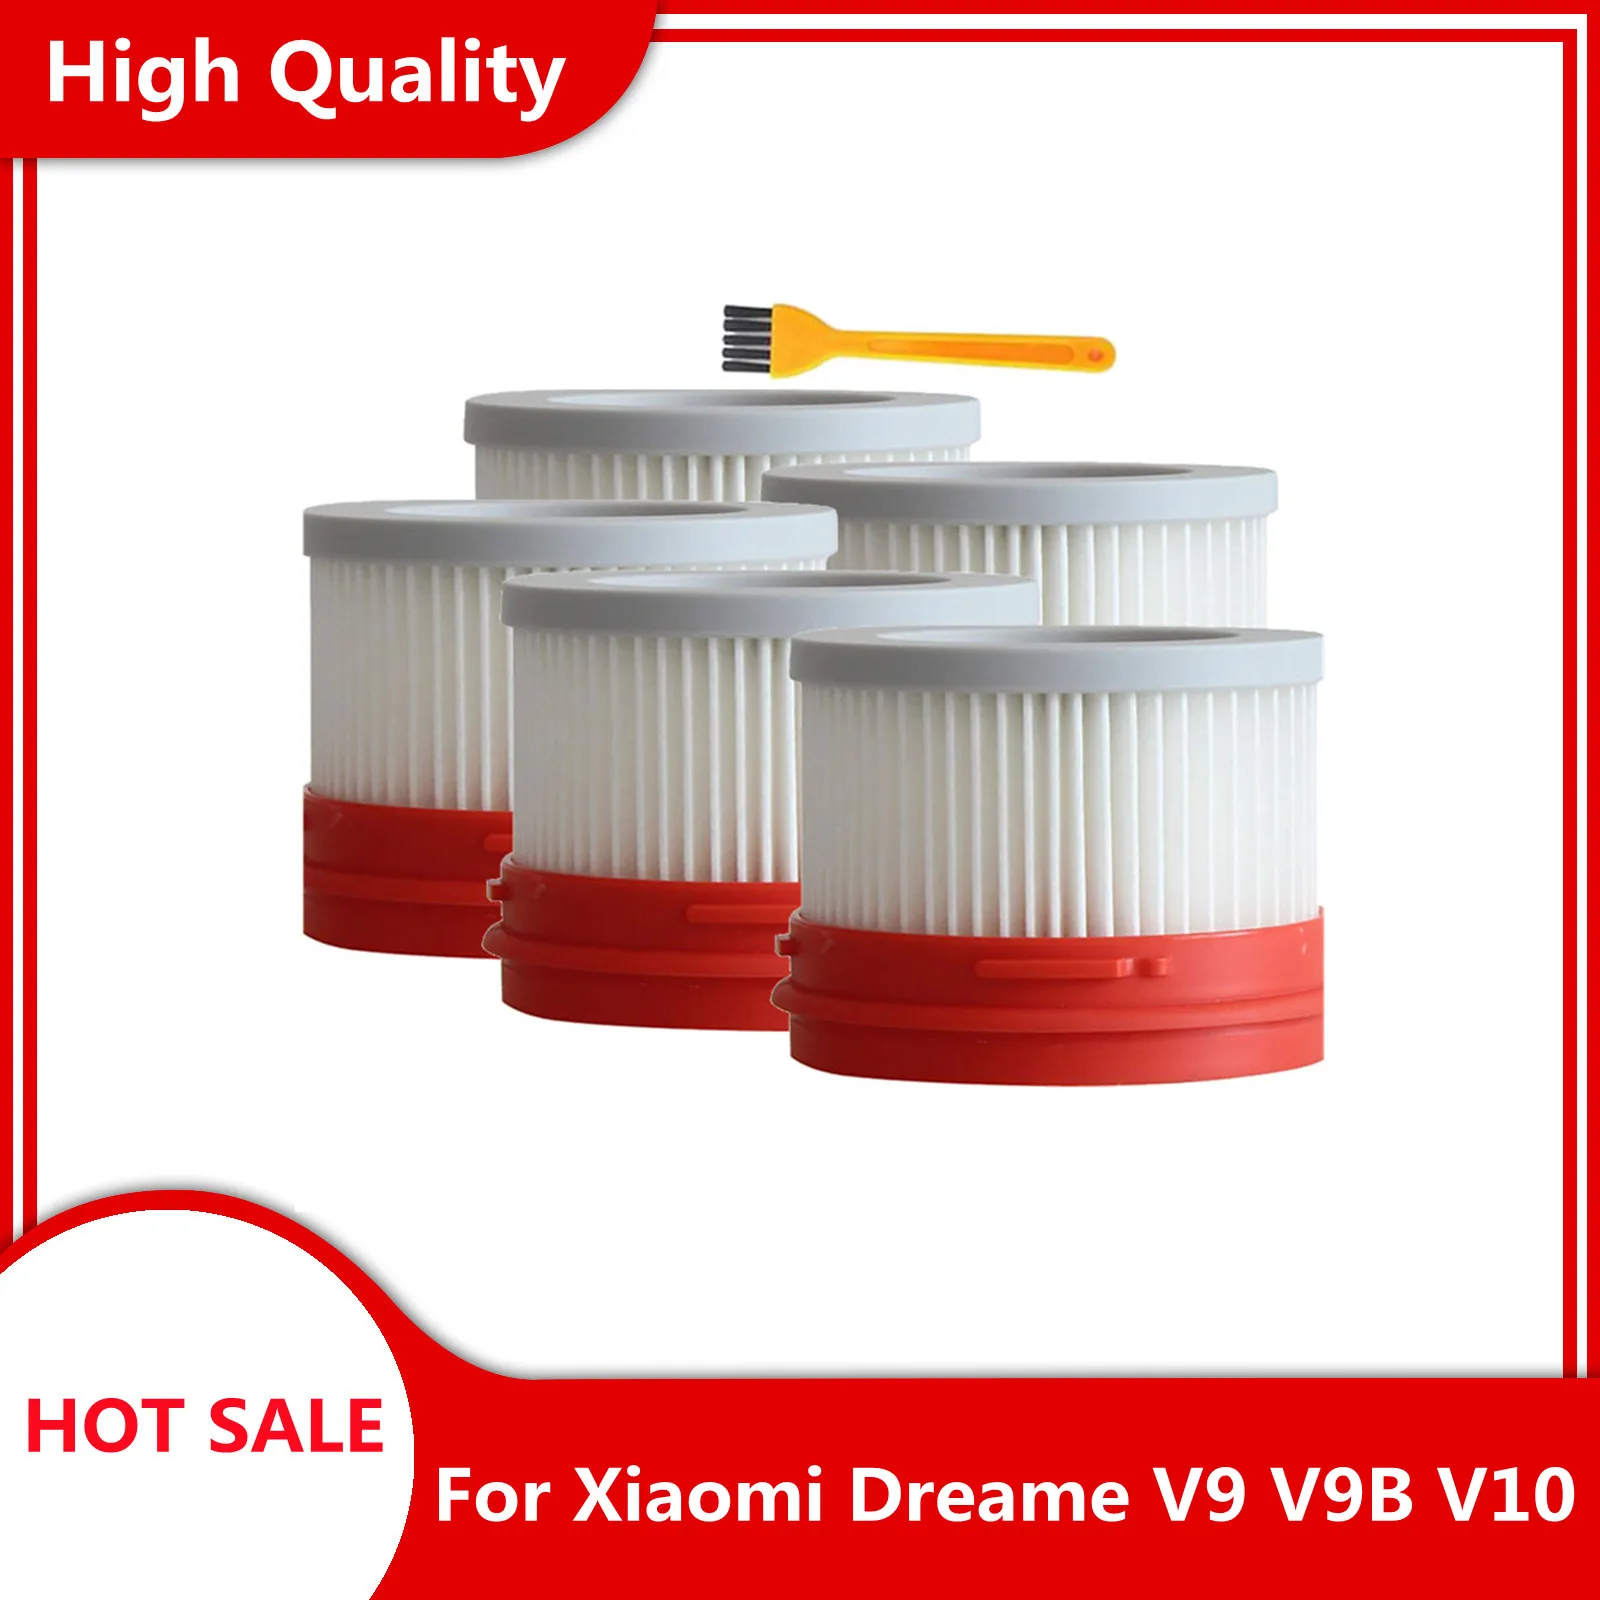 HEPA Filter For Xiaomi Dreame V9 V9B V10 Household Wireless Handheld Vacuum Cleaner Parts Dust Filter Replacement Filters 2pcs hepa filter fit for xiaomi dreame v9 household wireless handheld vacuum cleaner accessories